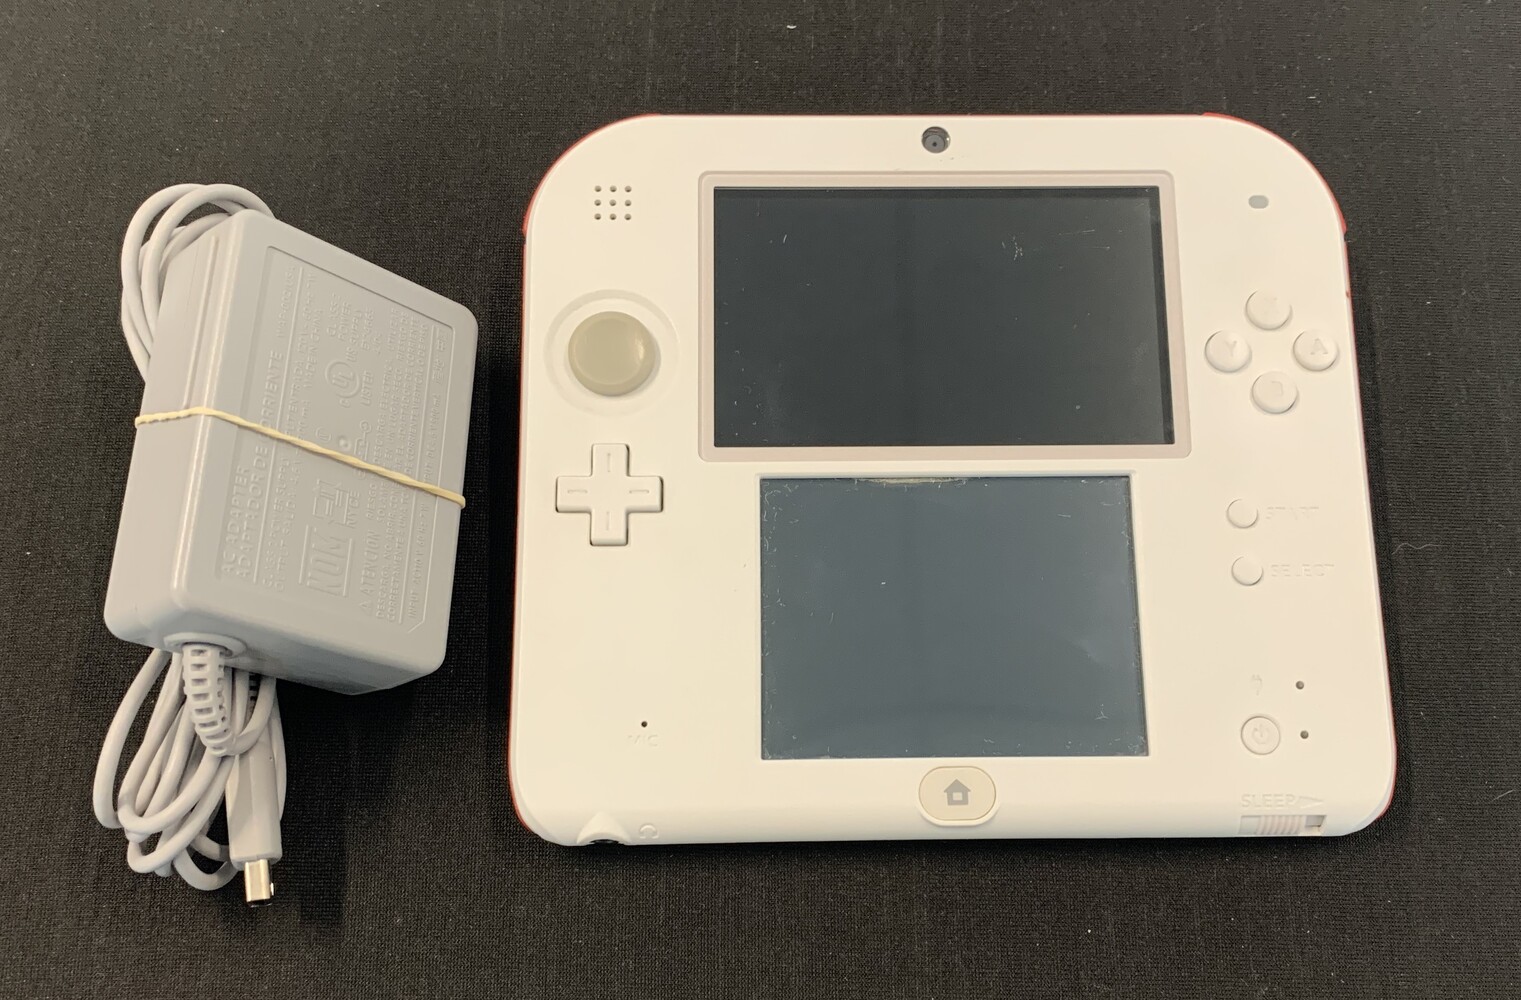 Nintendo 2DS Scarlet Red & White Console FTR-001 with Power Supply 